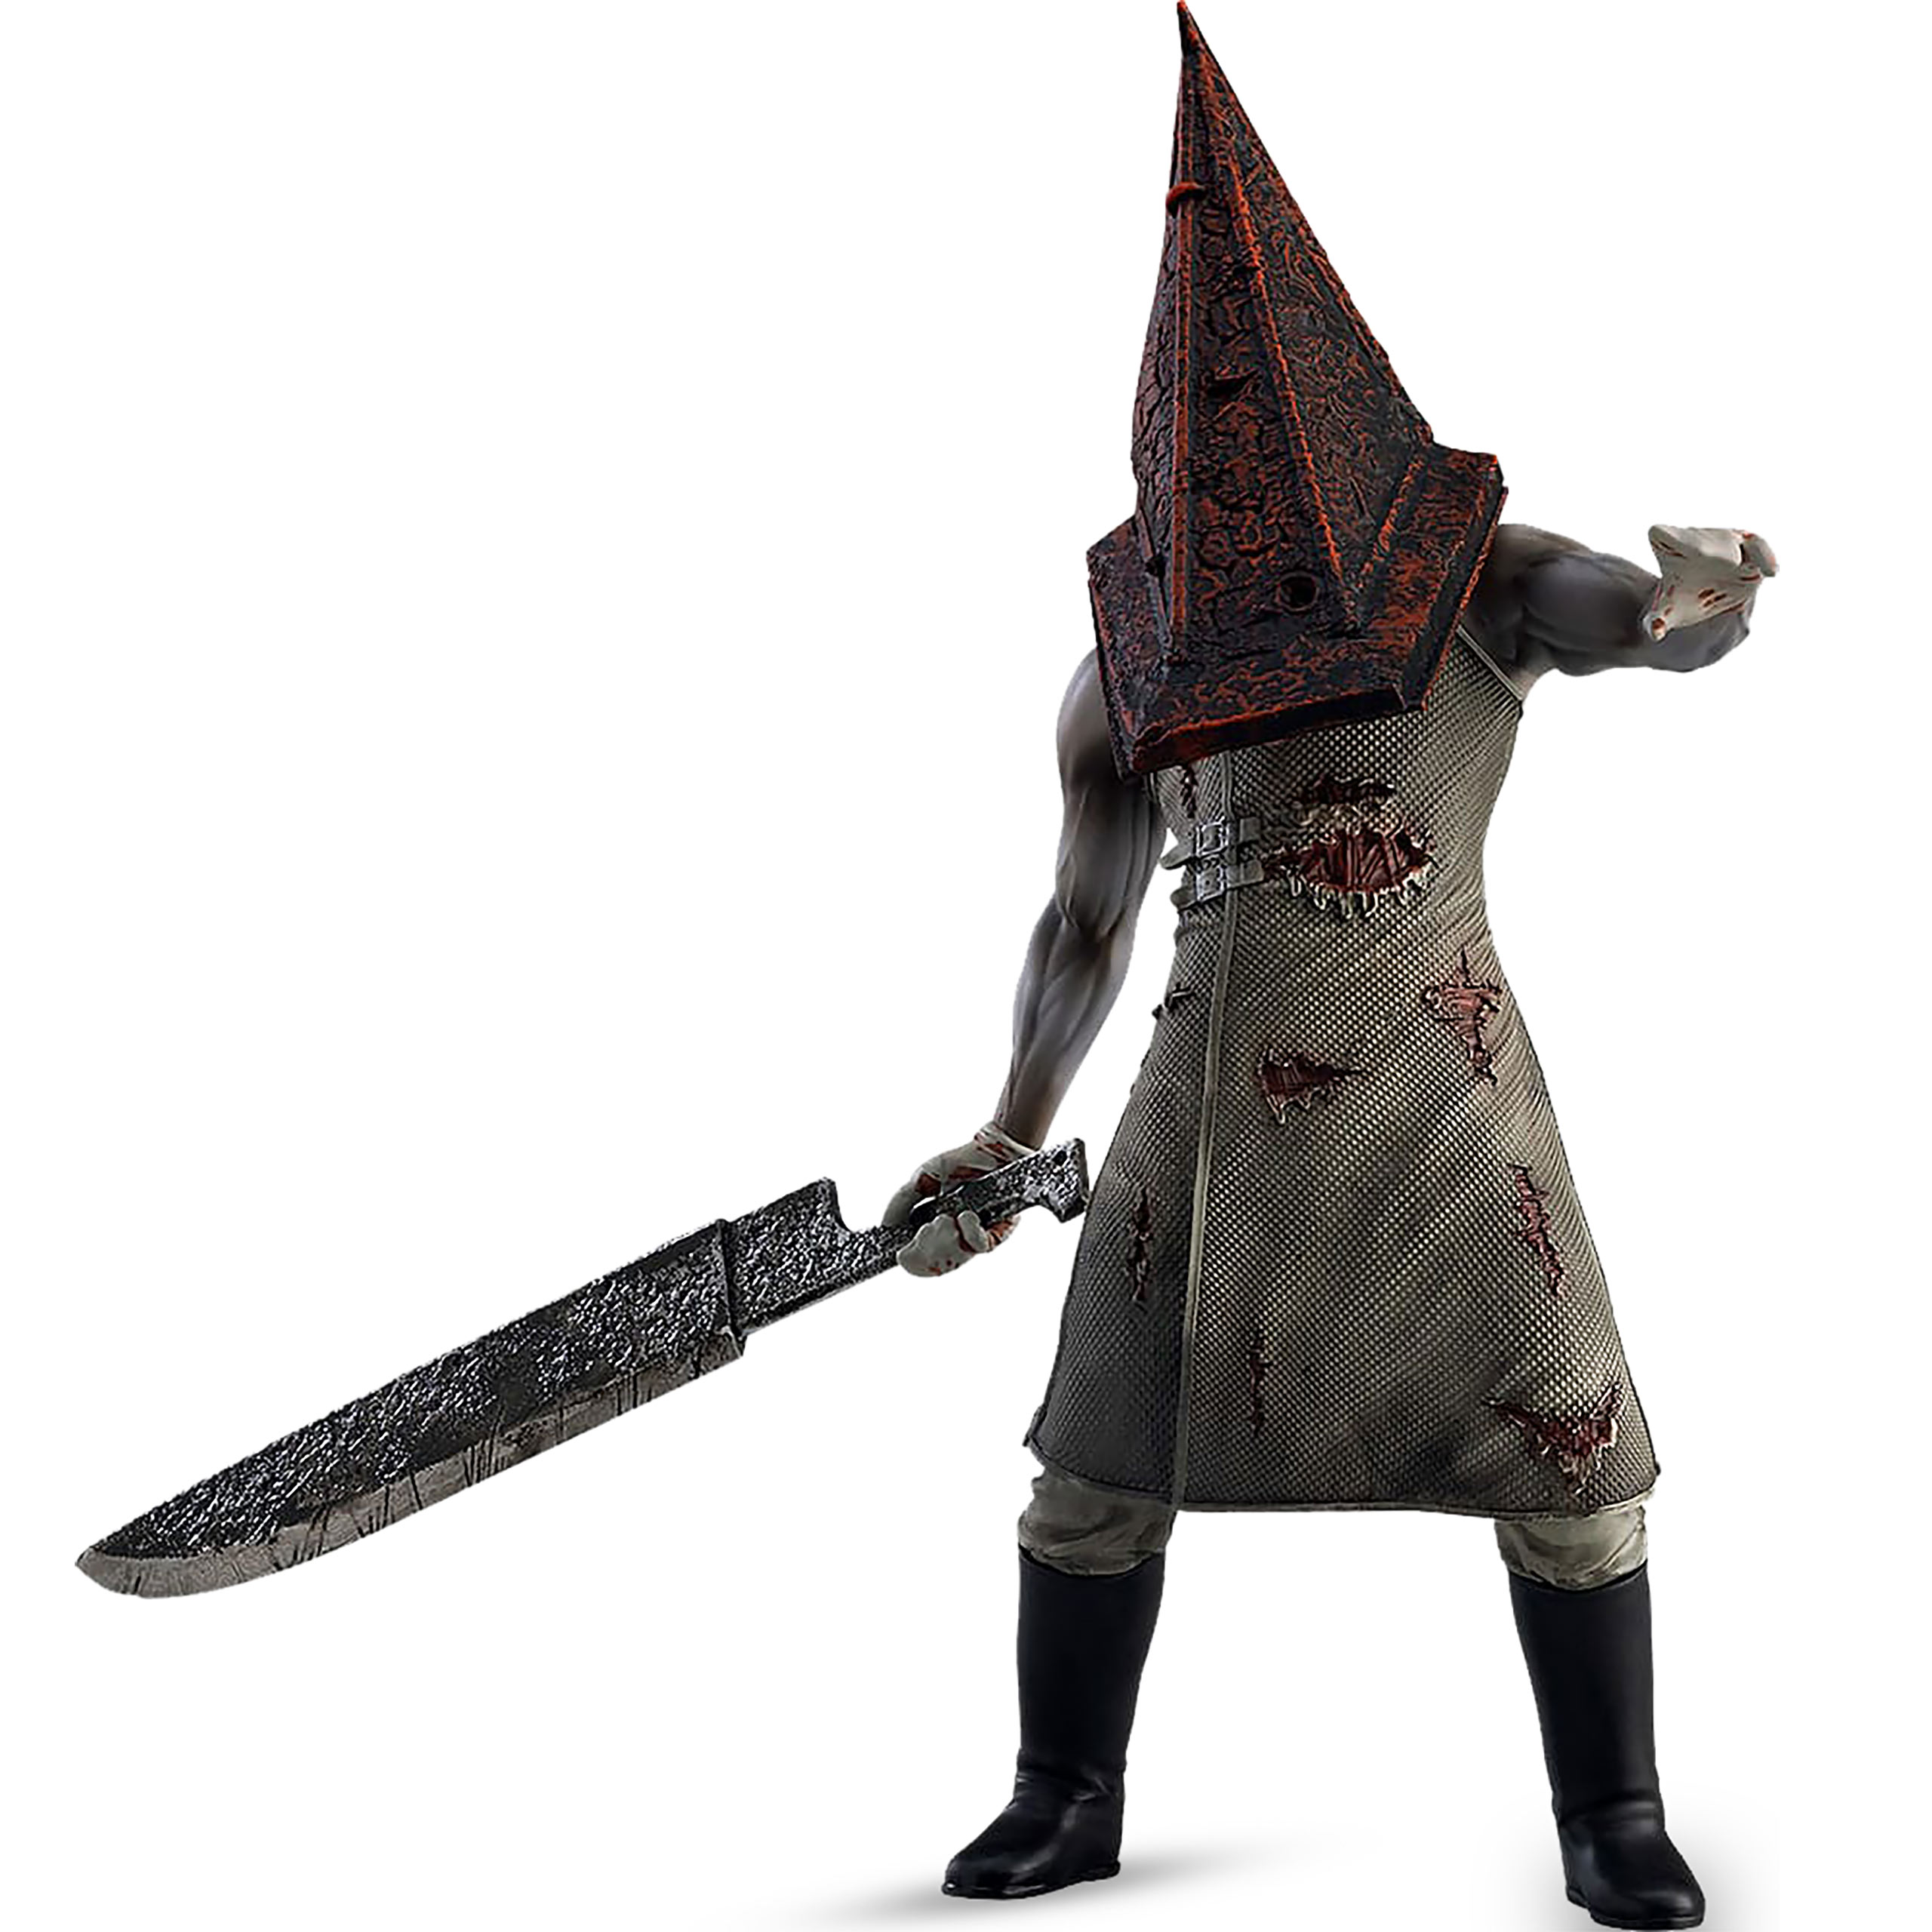 Silent Hill 2 - Red Pyramid Head Figure